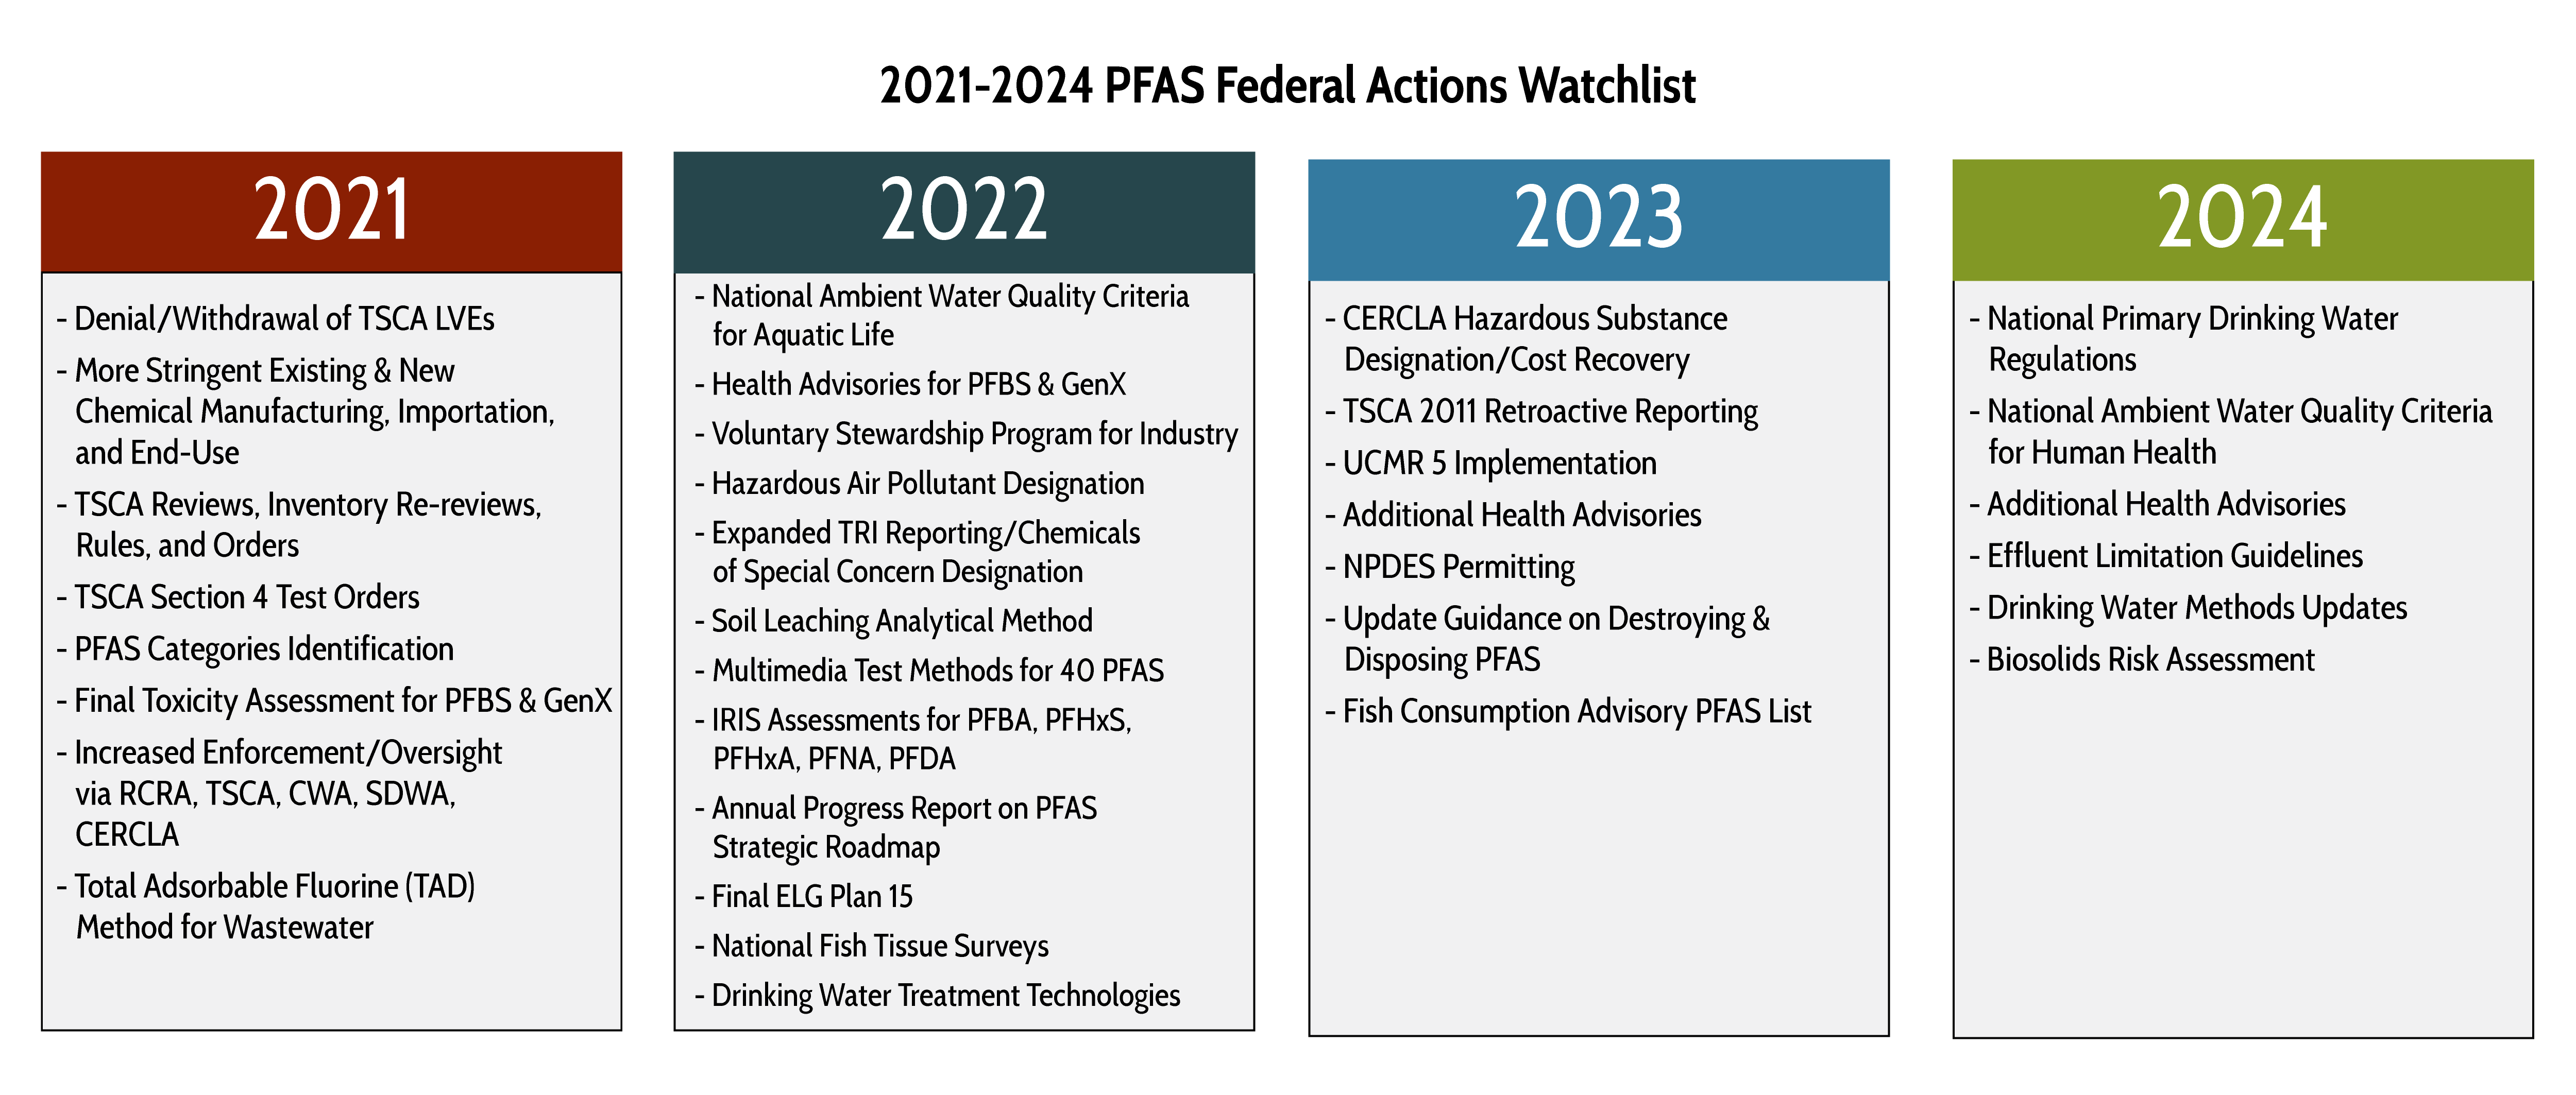 PFAS Federal Regulations Part 3 Recent Actions Affecting Industry